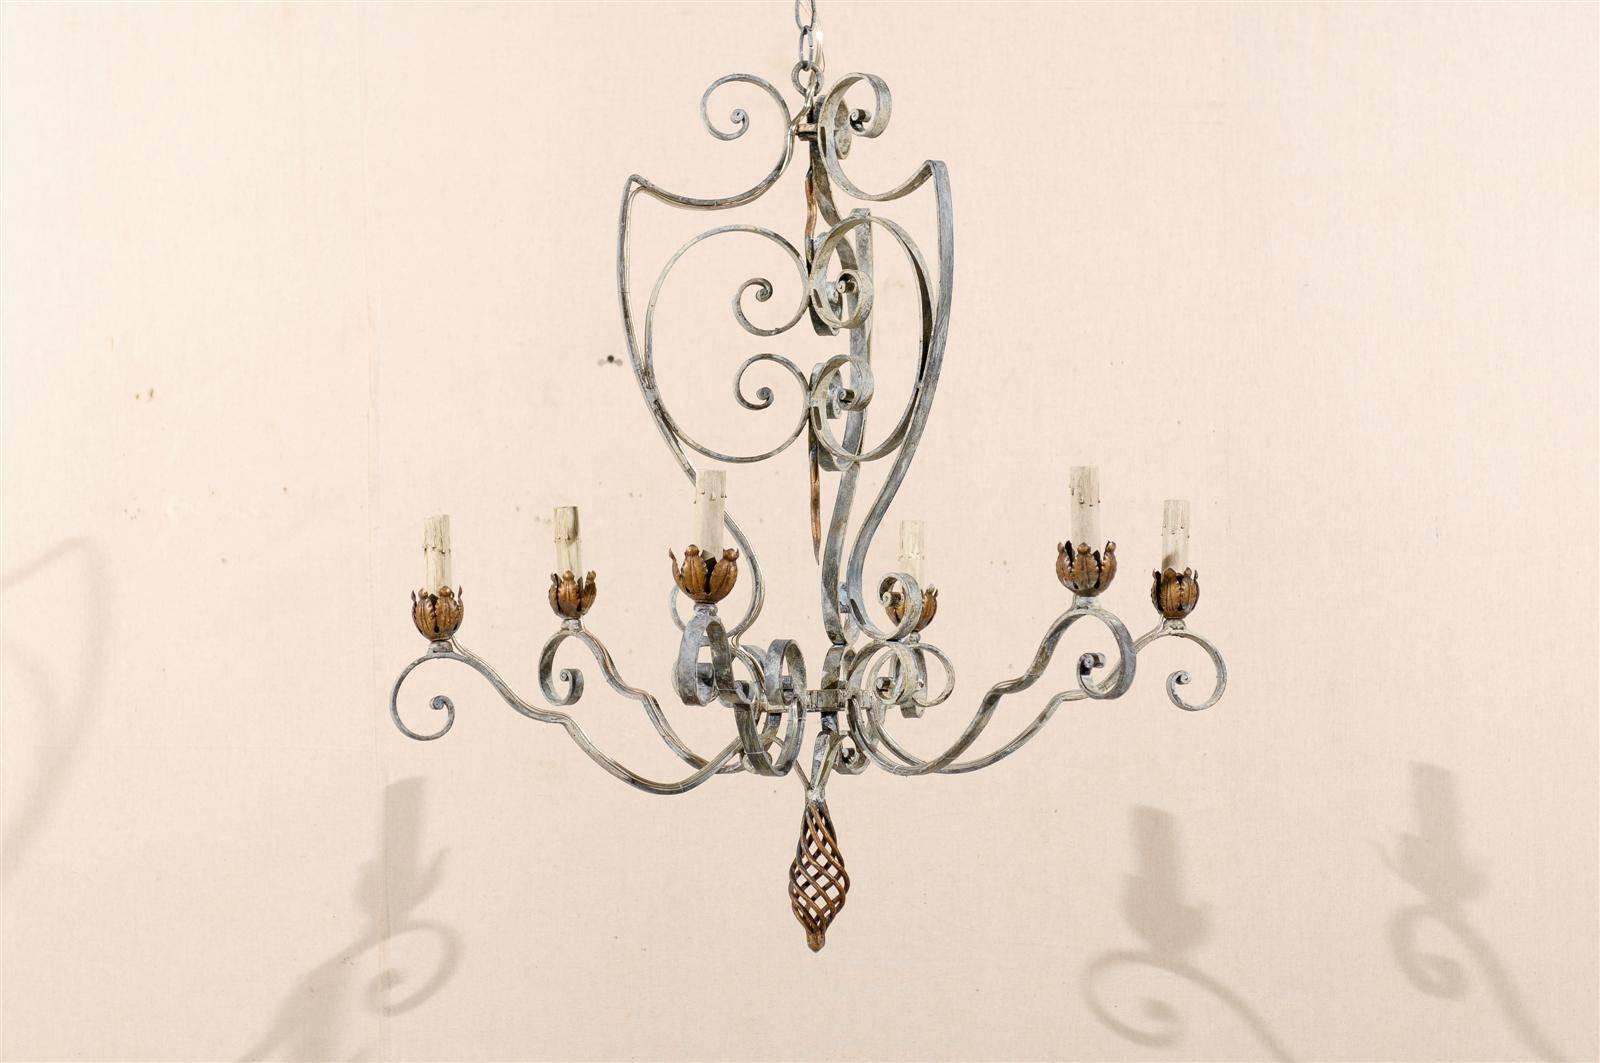 A French vintage painted iron six-light chandelier with flower shaped bobeches from the mid-20th century.

This painted iron chandelier has been rewired for the US market and comes with a complimentary 3 foot chain and canopy painted to match.